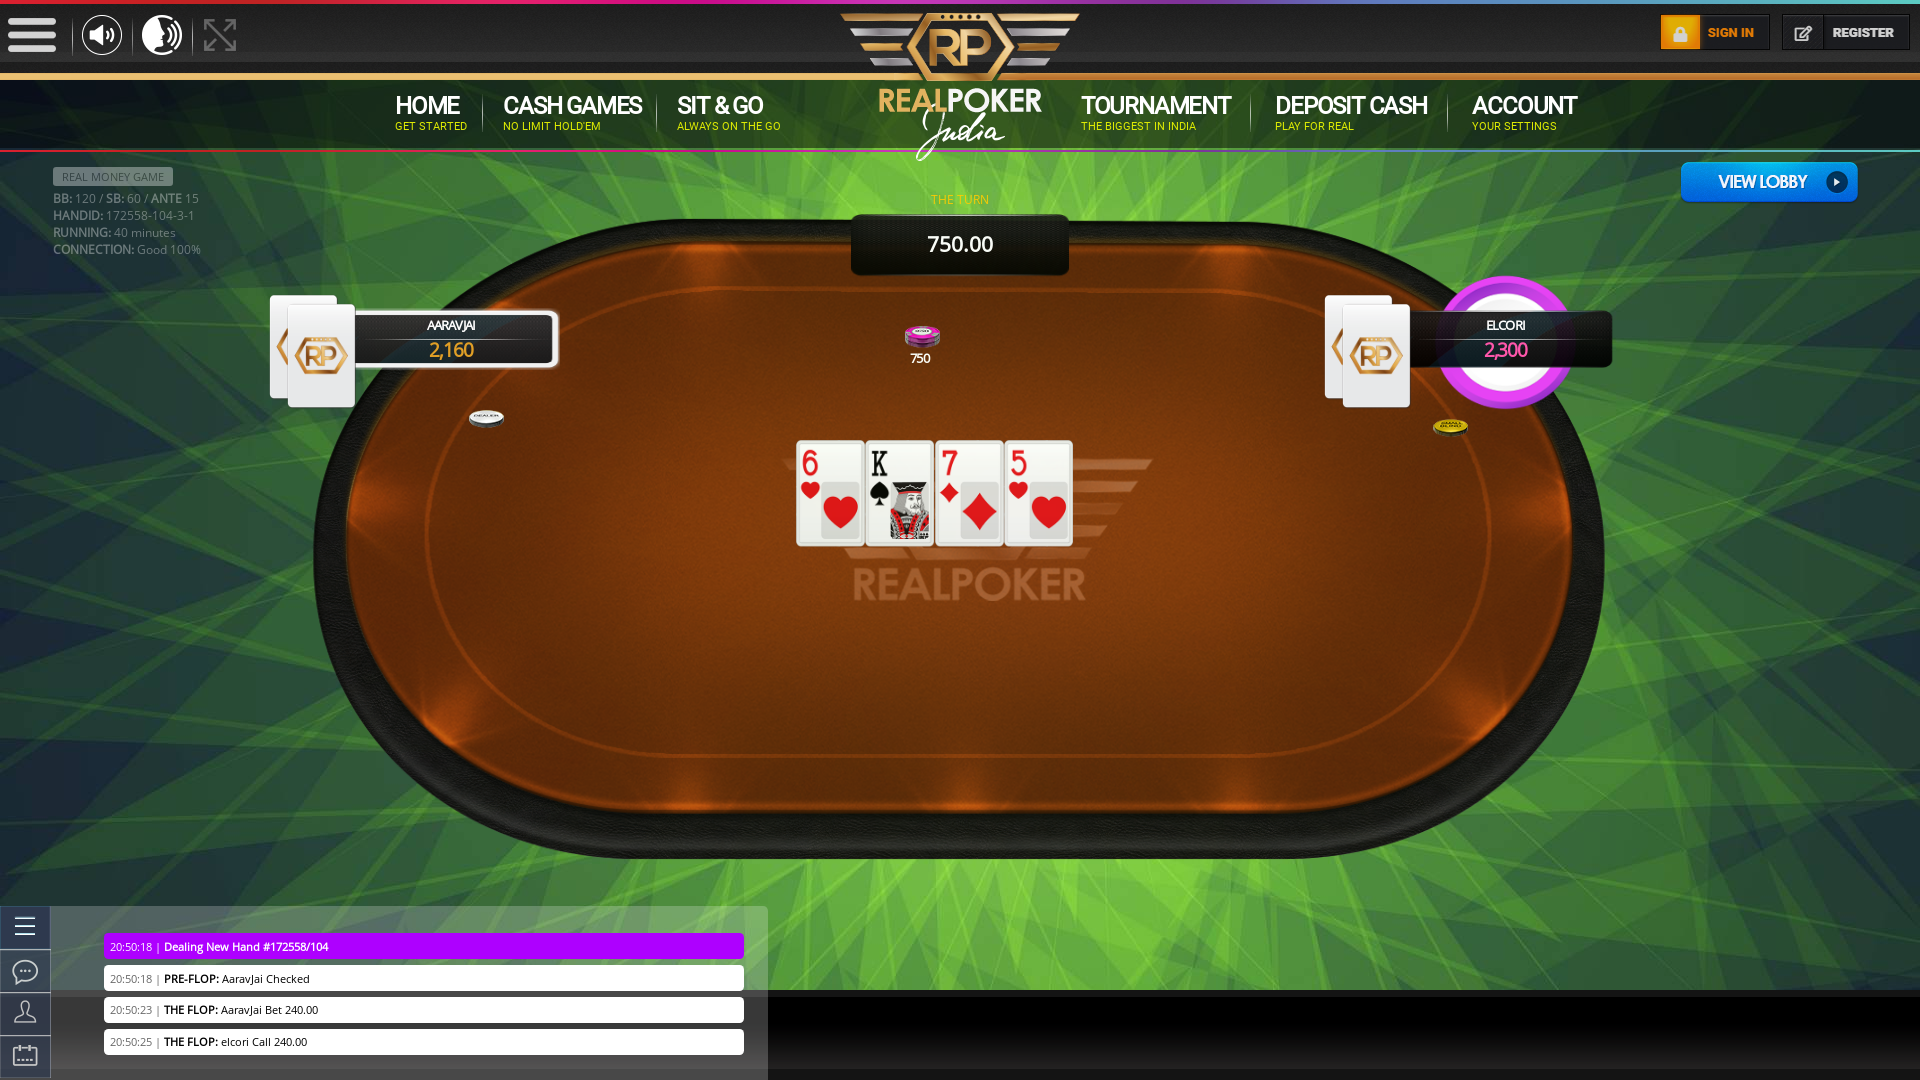 Indian poker on a 10 player table in the 39th minute